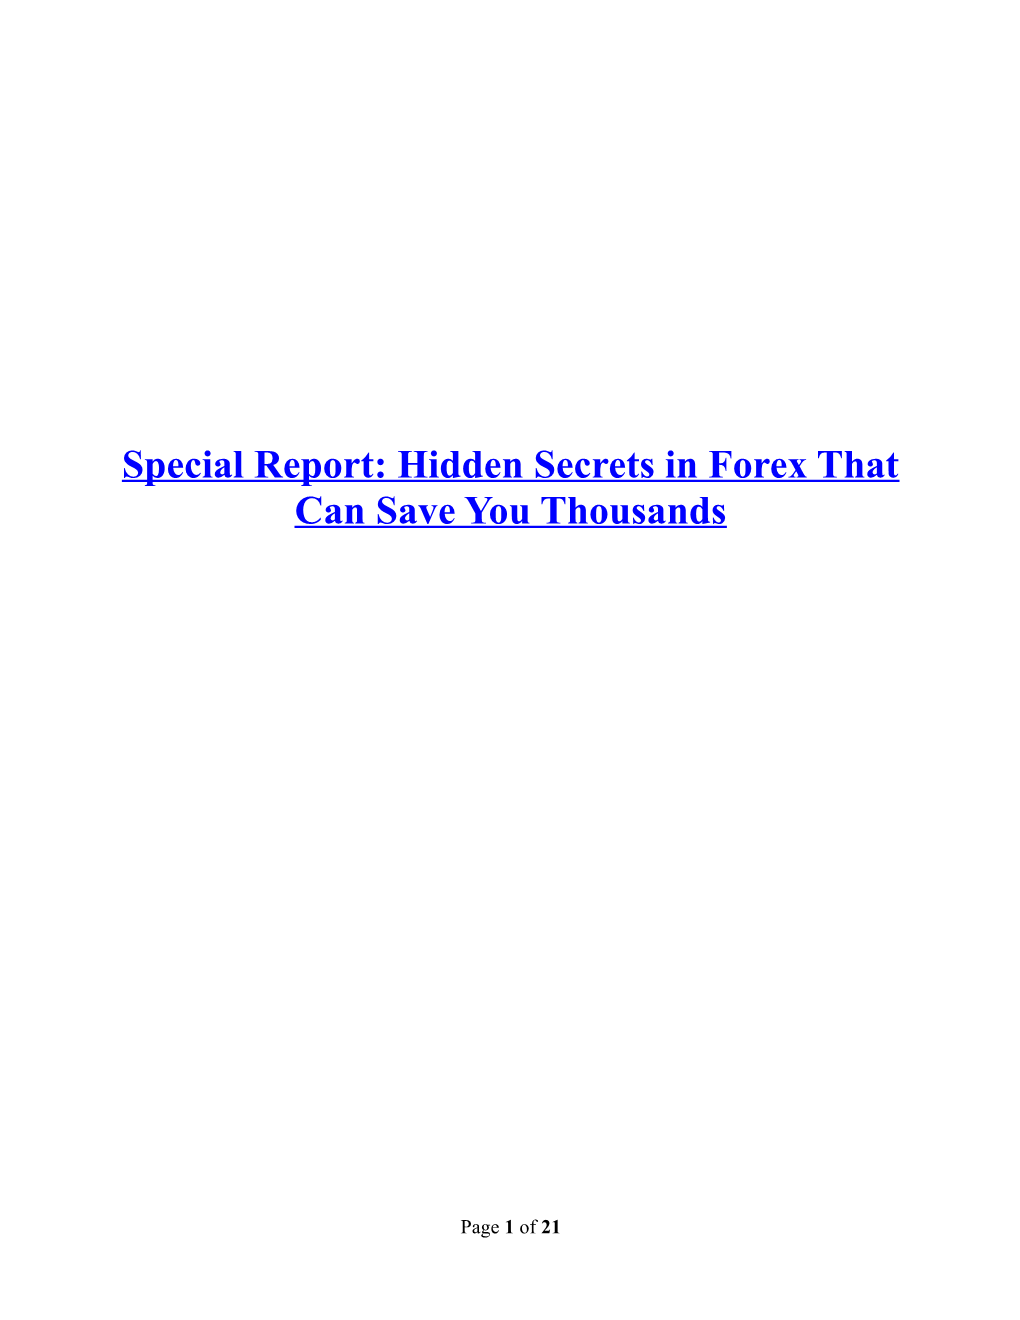 Special Report: Hidden Secrets in Forex That Can Save You Thousands